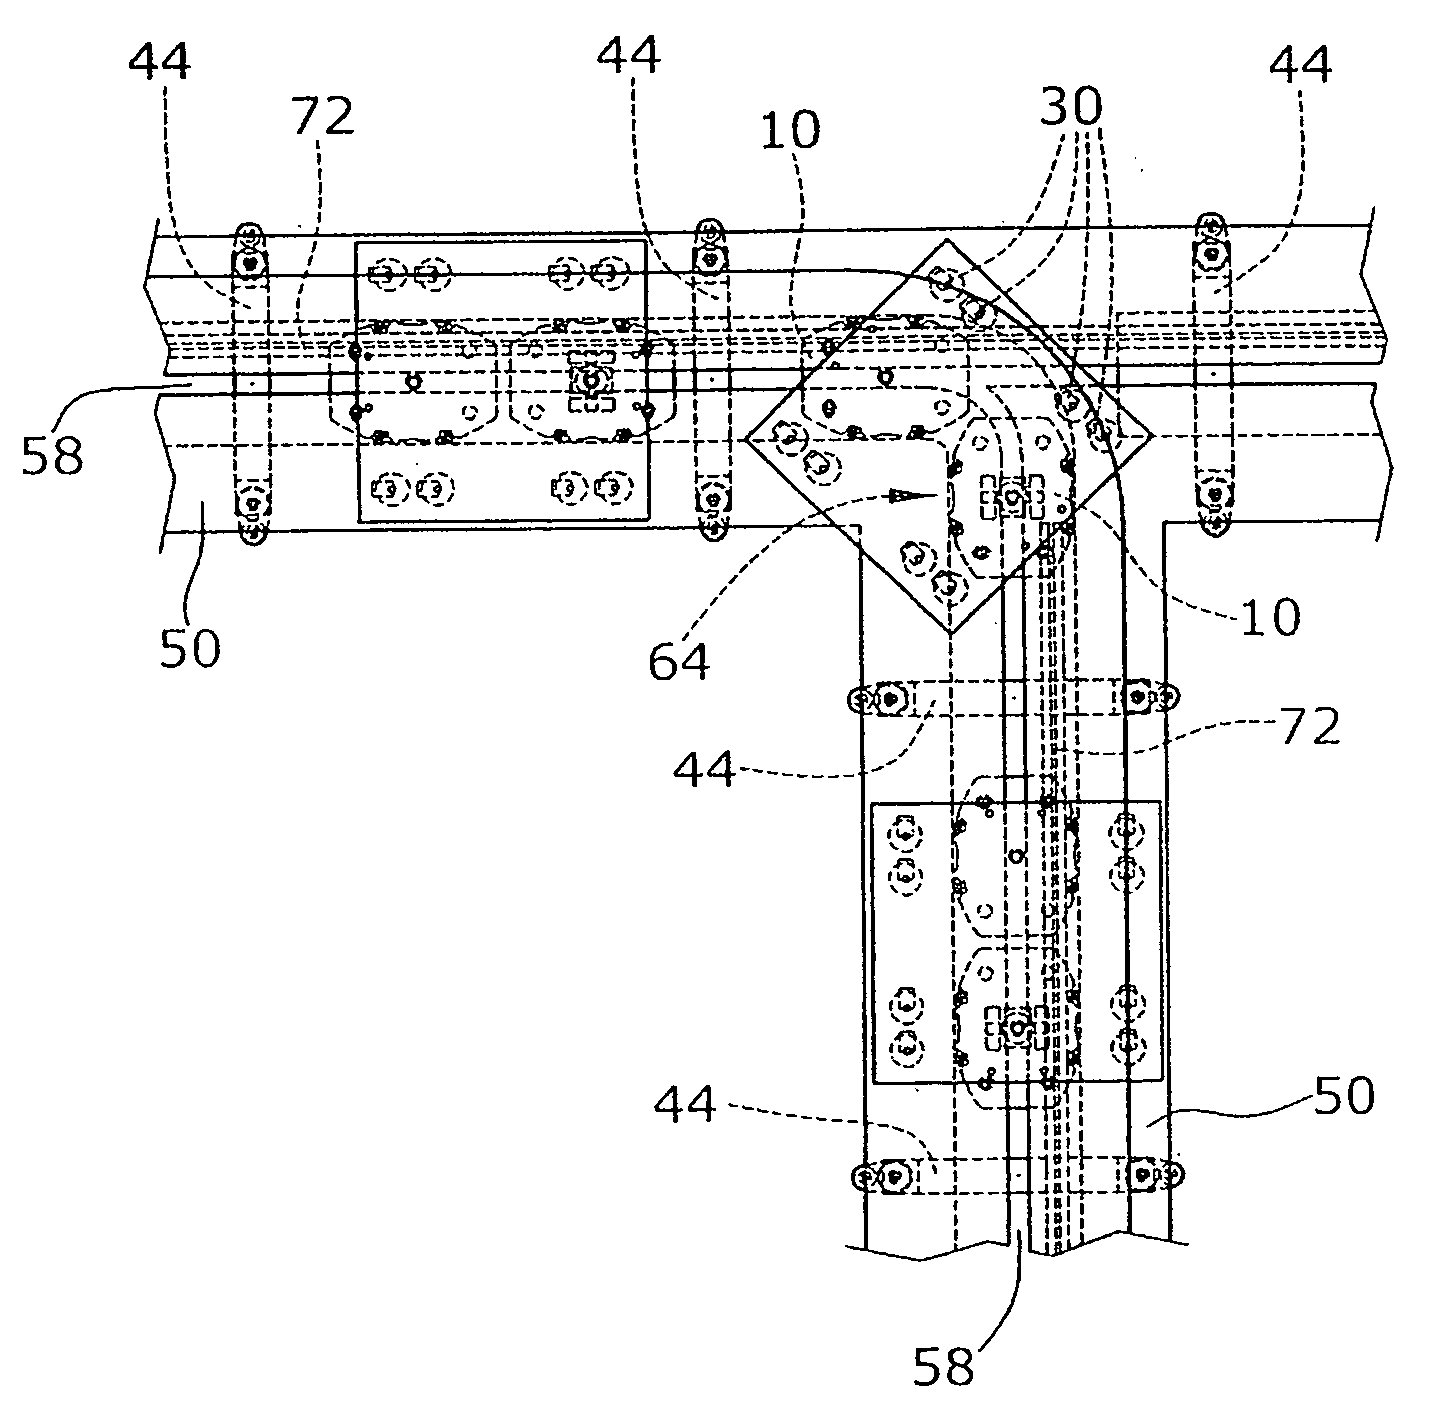 Workplace carrier and conveyor system